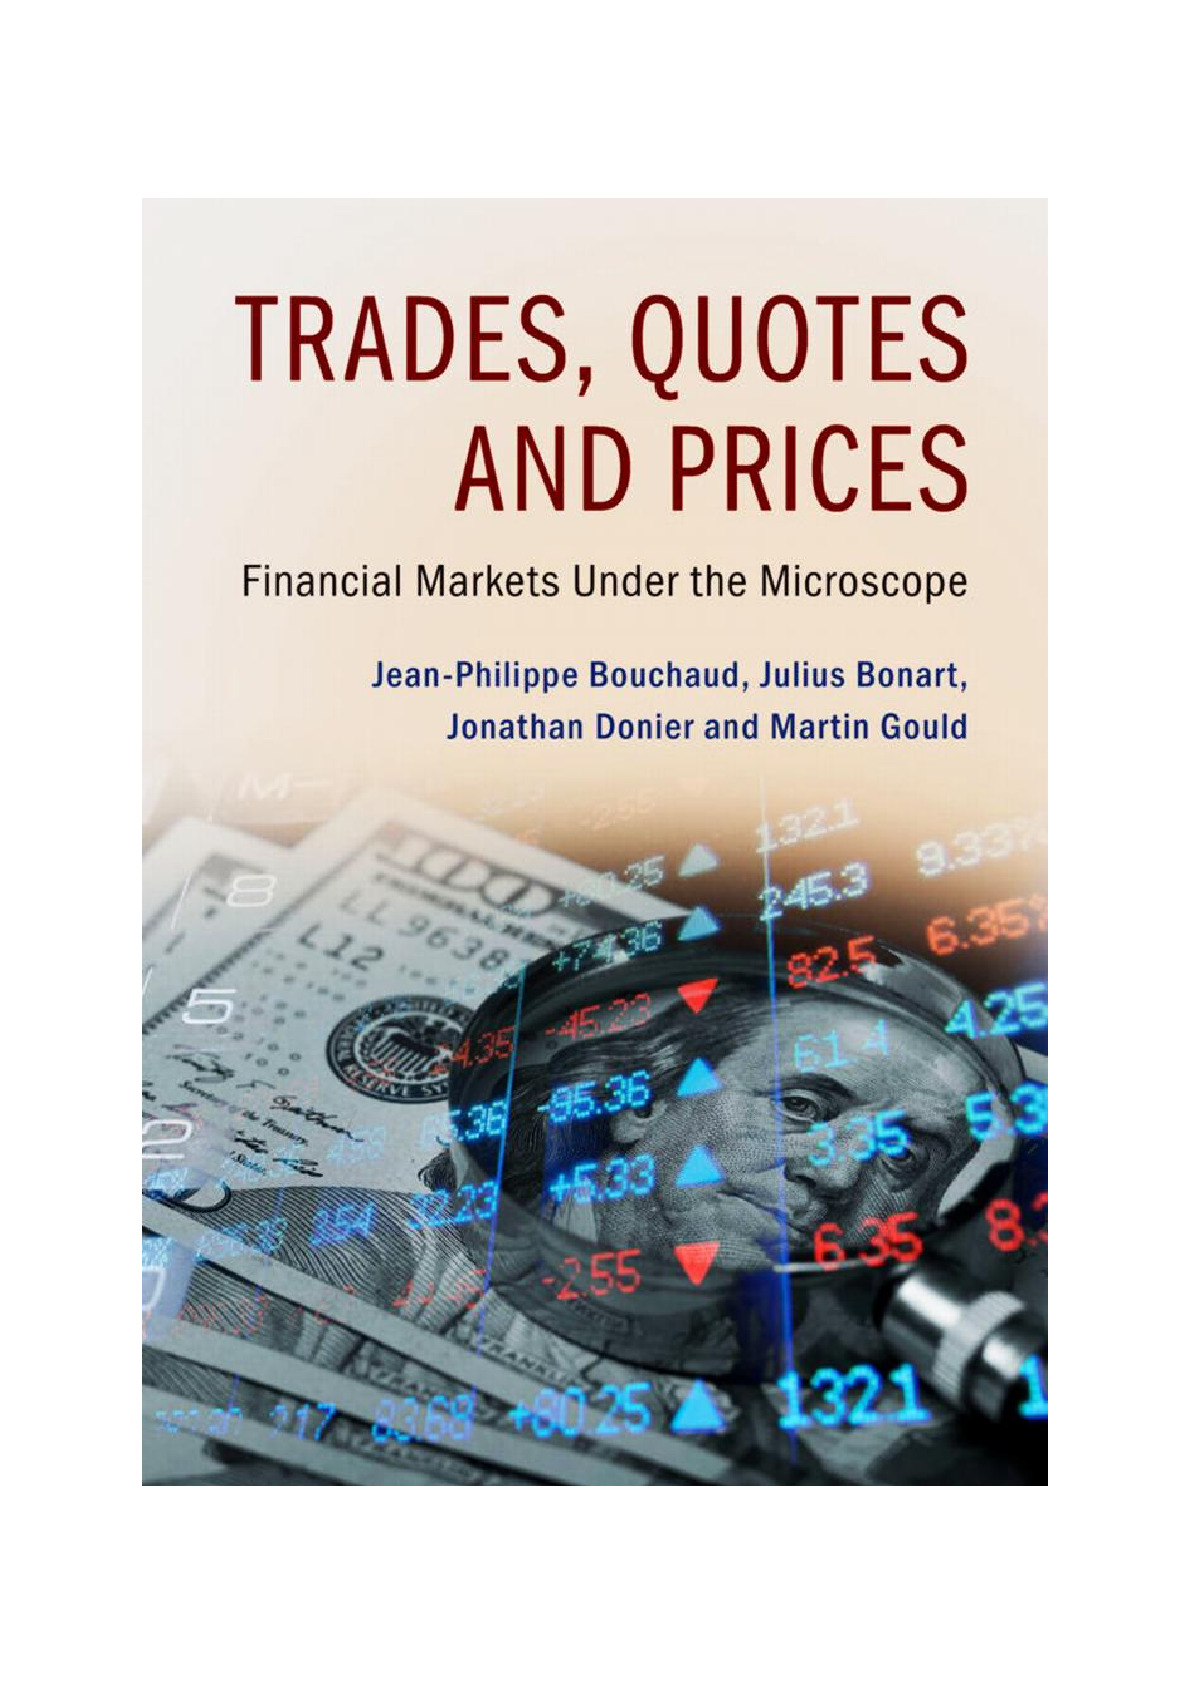 Jean-Philippe Bouchaud, Julius Bonart, Jonathan Donier, Martin Gould – Trades, Quotes and Prices_ Financial Markets Under the Microscope (2018, CUP) – libgen.lc